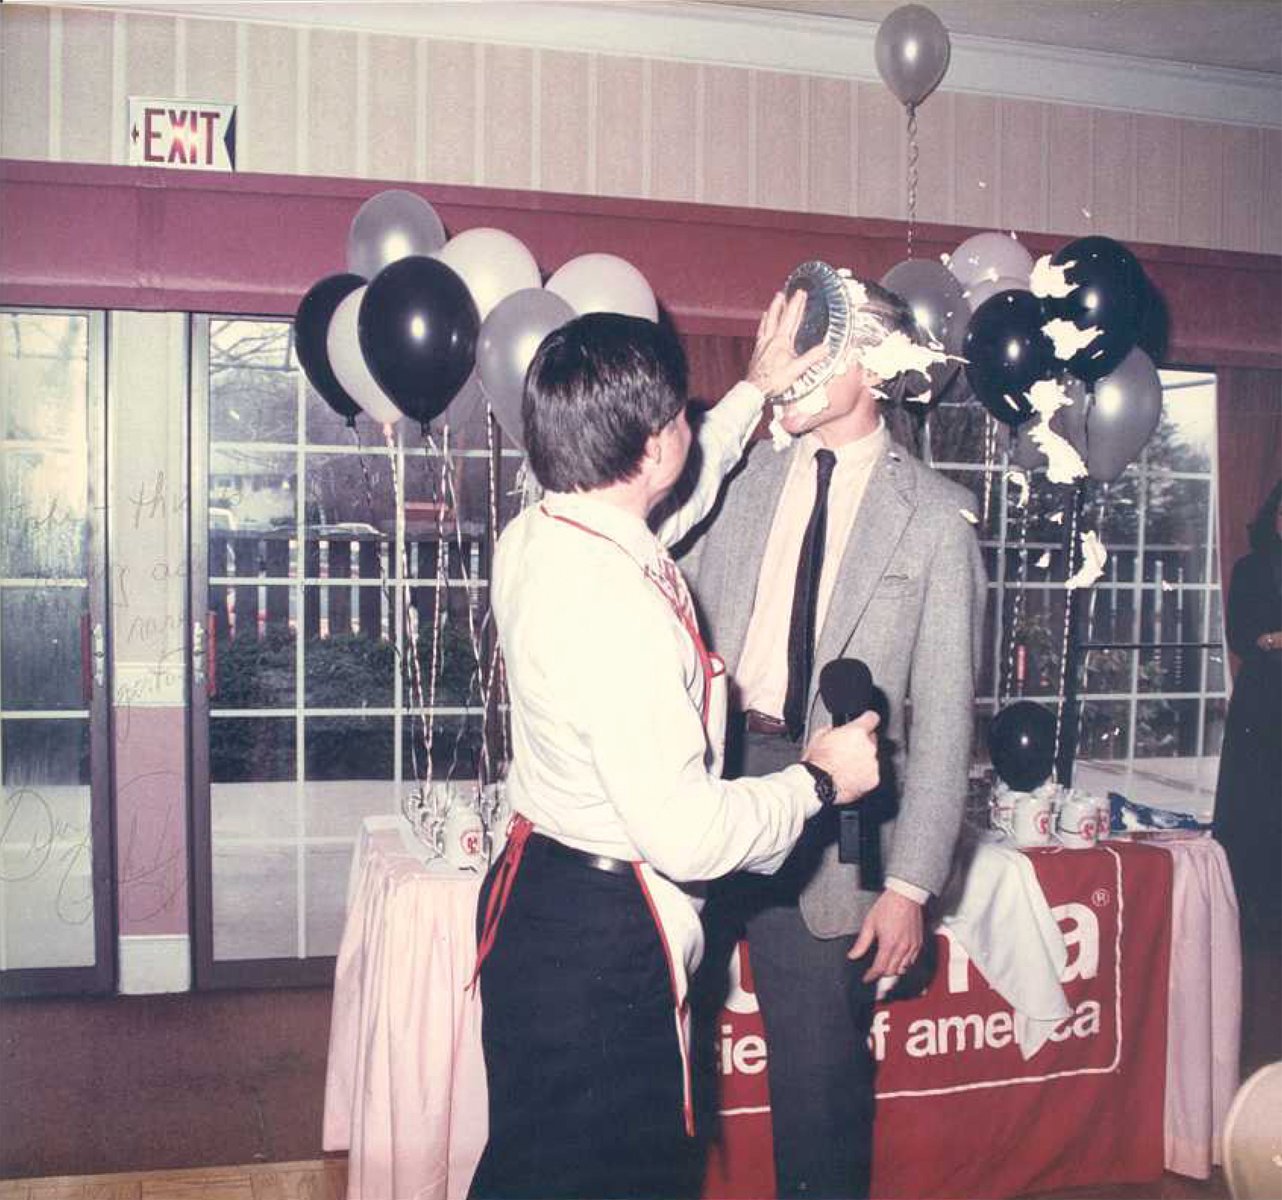 ALL FOR A GOOD CAUSE:  As mayor of Warwick, Francis X. Flaherty often assumed the role of master of ceremonies at nonprofit fundraising events – and as seen here, even threw a pie or two. The recipient is John Howell, who was covering (or, should we say got covered) for the event. 